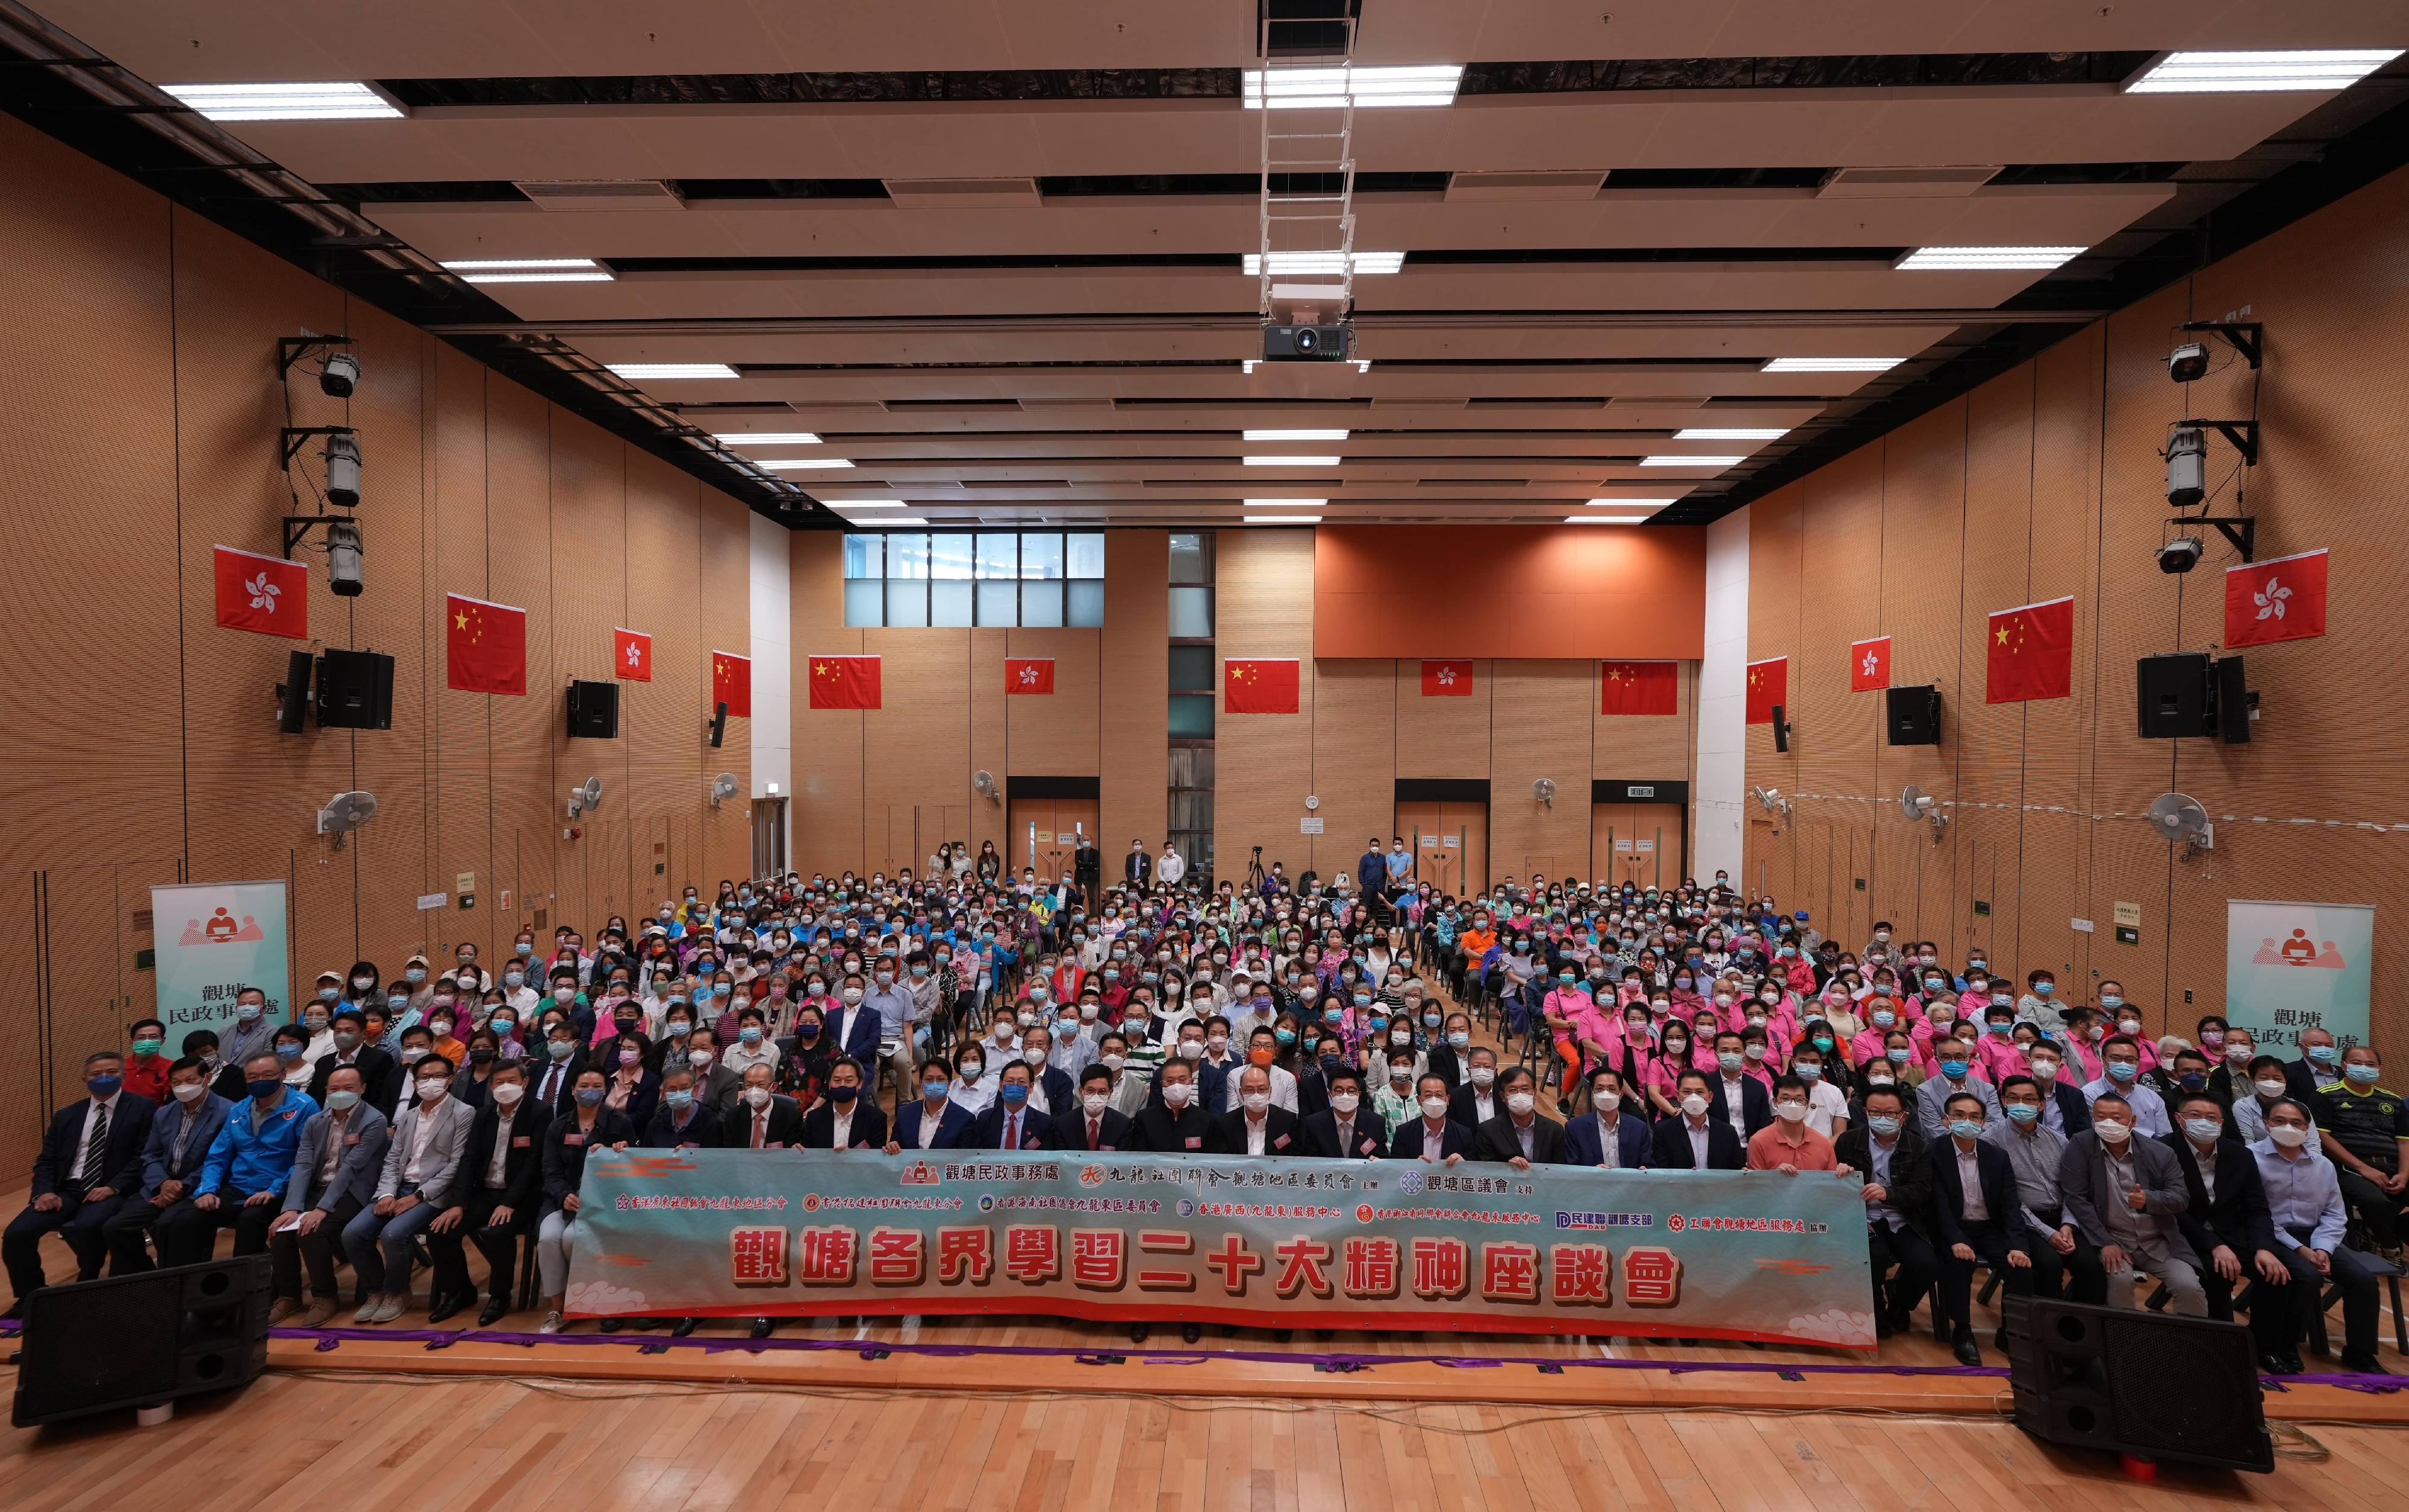 The Kwun Tong District Office yesterday (October 26) held the session on "Essence of the 20th National Congress of the Communist Party of China" with the Kowloon Federation of Associations Kwun Tong District Committee at Sau Mau Ping Community Hall. Photo shows the guests and participants at the session.